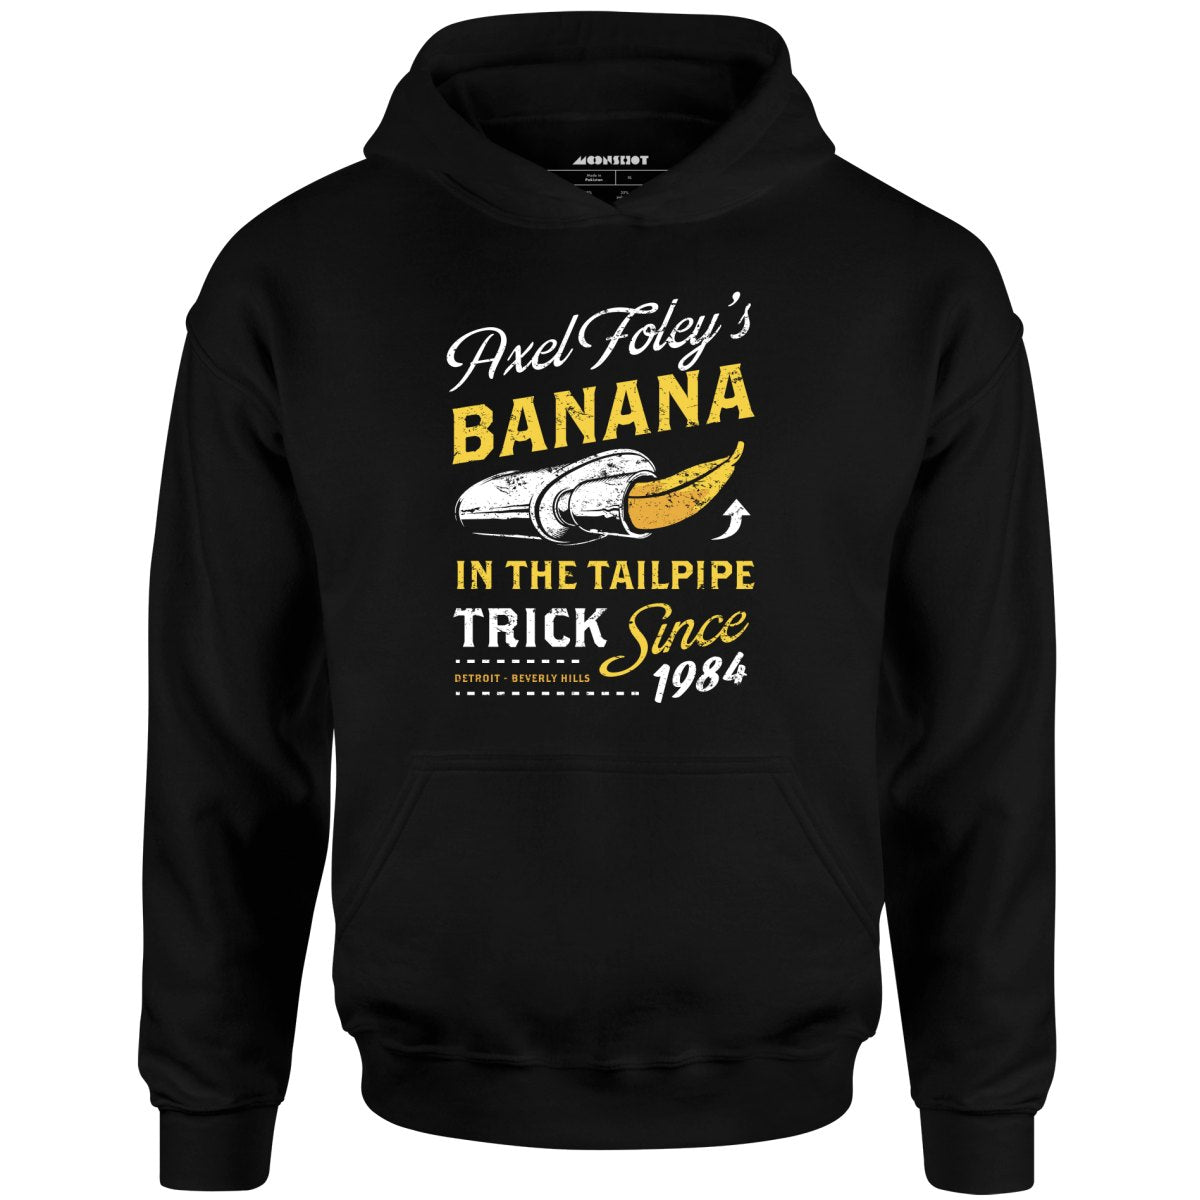 Axel Foley's Banana in the Tailpipe Trick - Unisex Hoodie